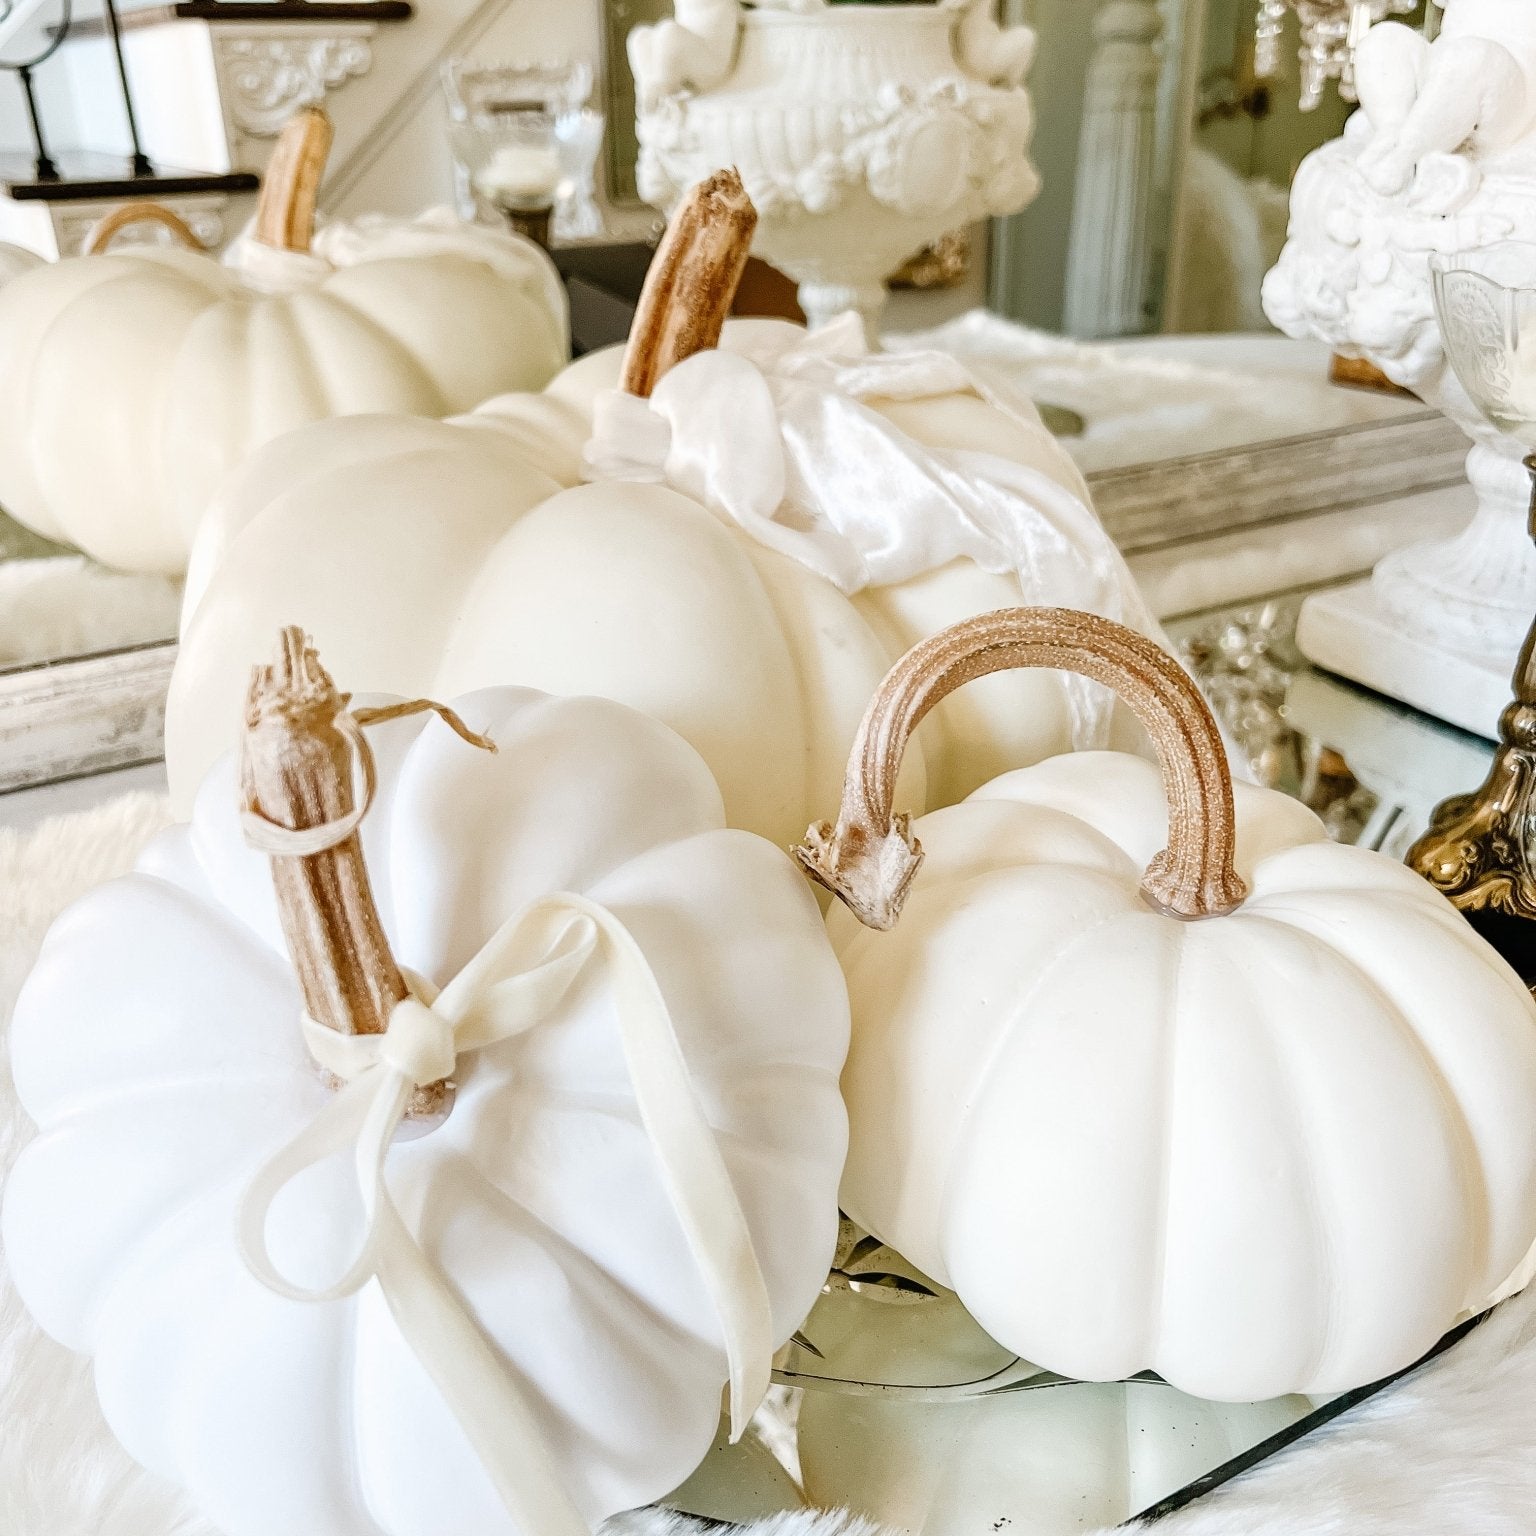 Real or Faux White Pumpkins? - Ivory Lane Home